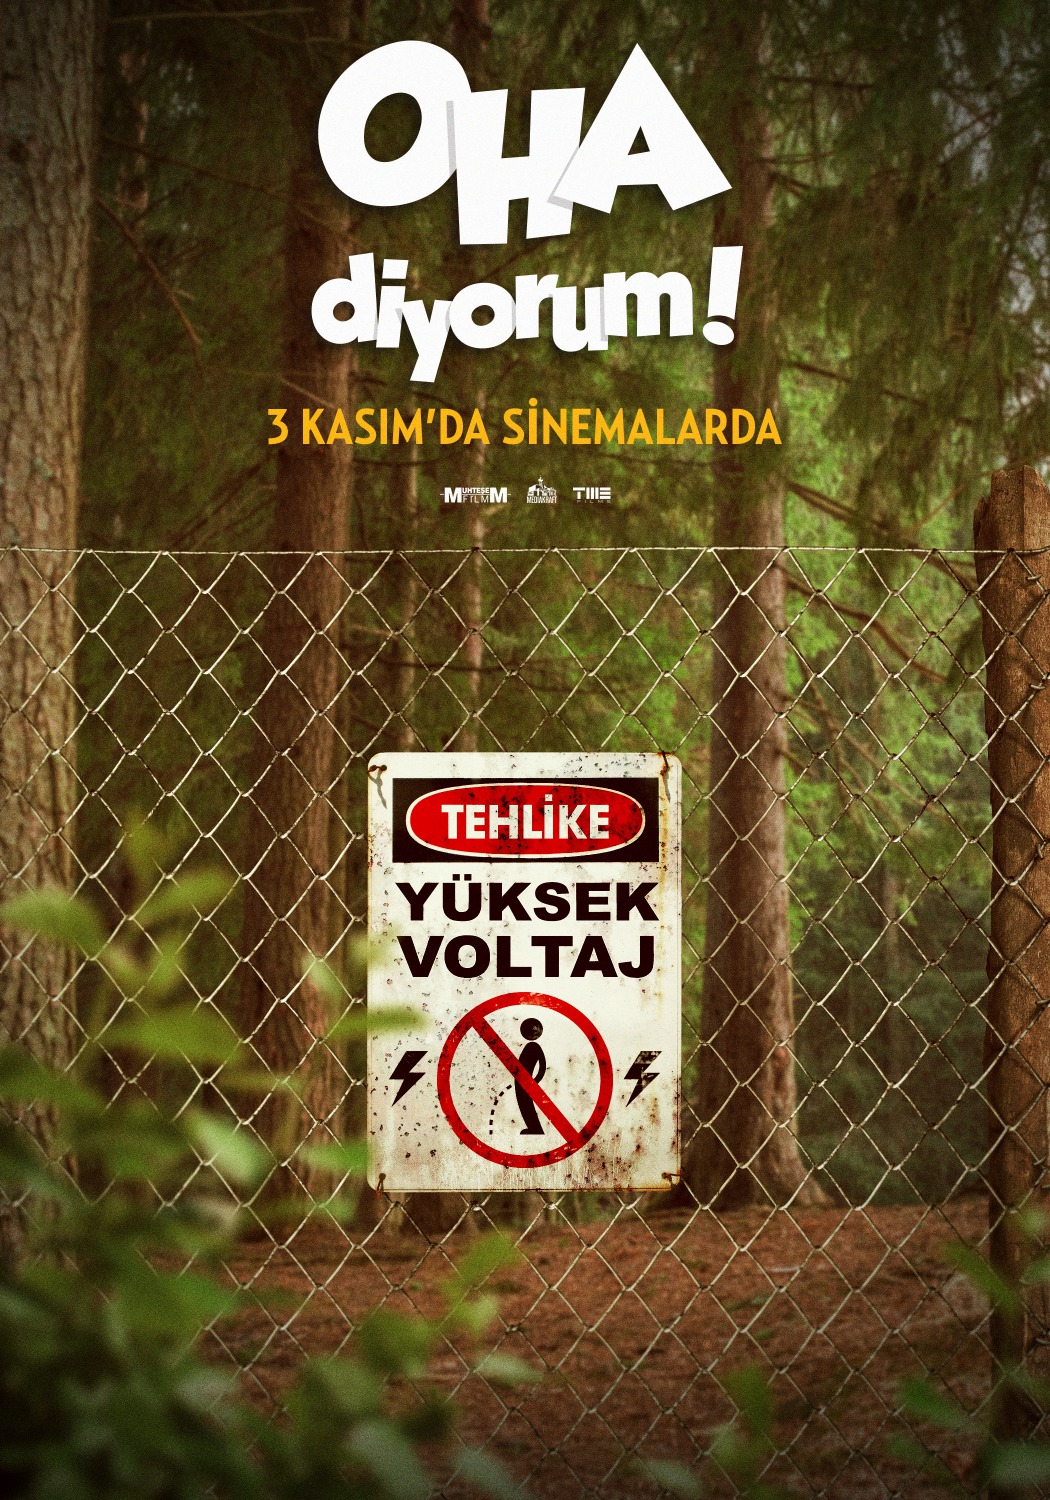 Extra Large Movie Poster Image for Oha Diyorum (#3 of 6)